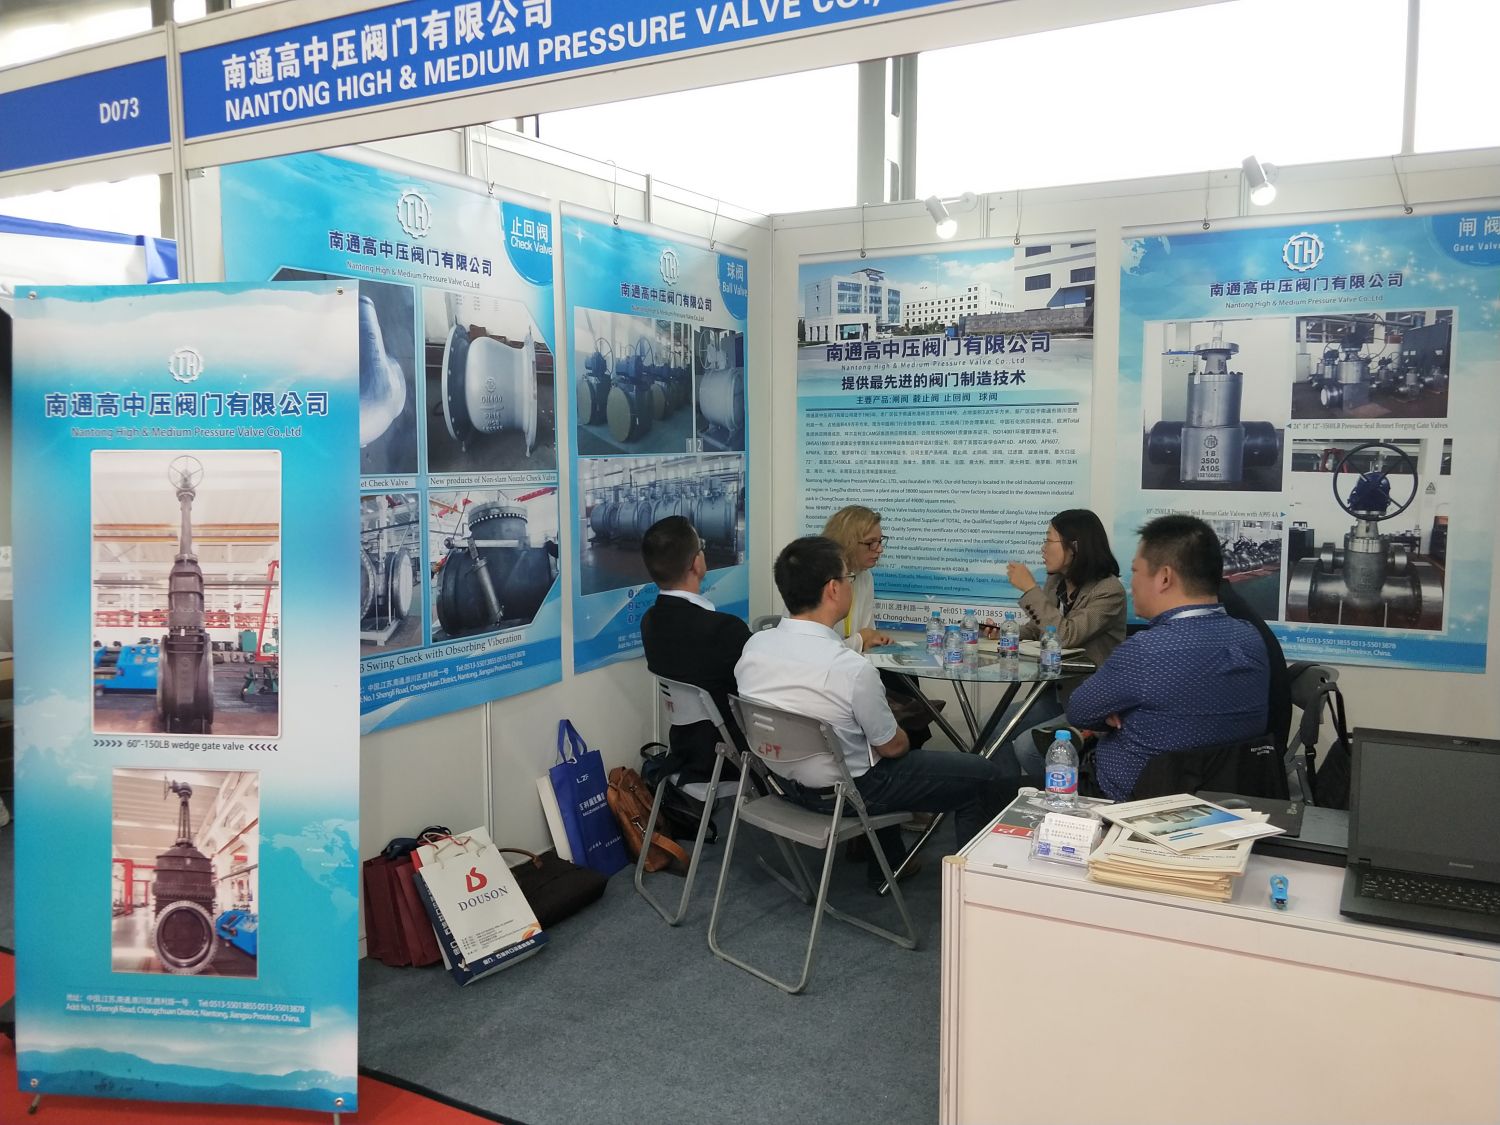 Nantong High & Medium Pressure Valve participated in the 9th China (Shanghai) International Fluid Machinery Exhibition in 2018